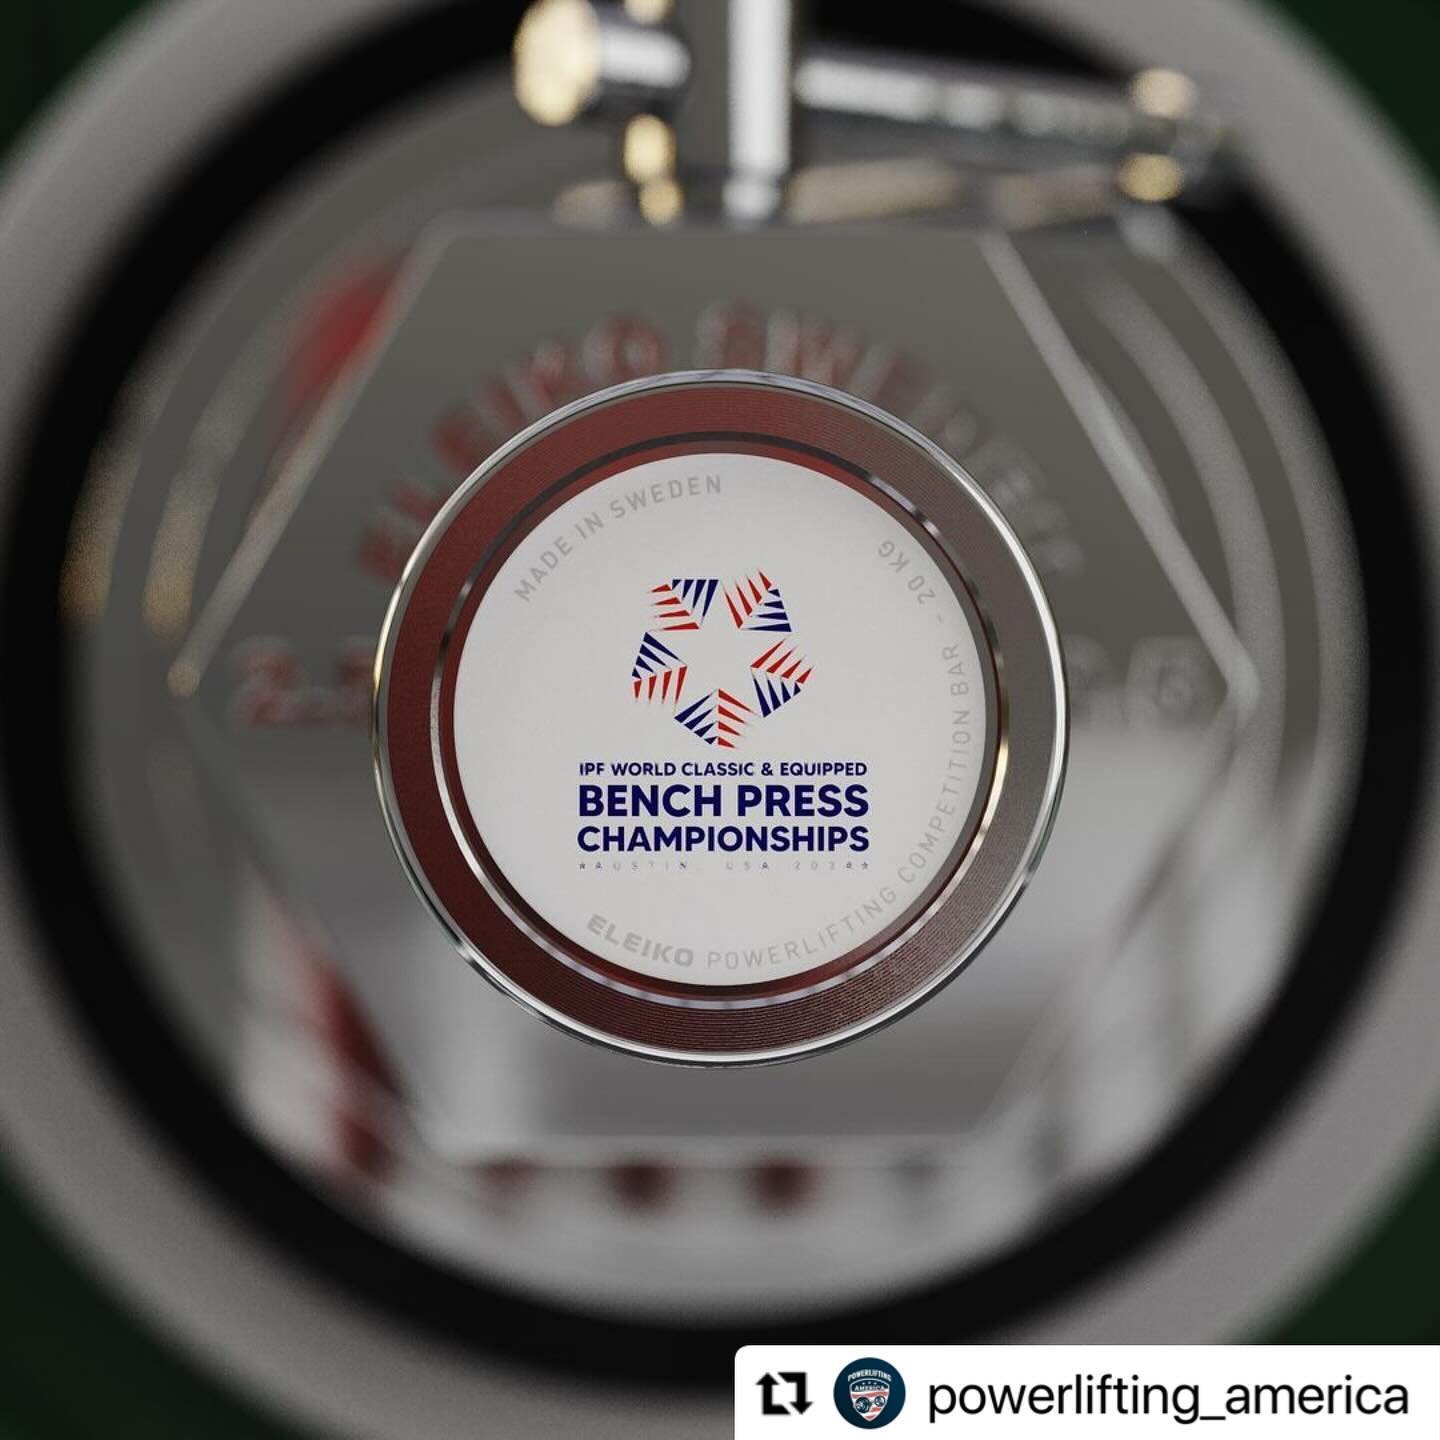 Pinch me, I must be dreaming !!! 🤩

#Repost @powerlifting_america
・・・
Just under two weeks until the 2024 World Bench Press Championships begins, and we have a sneak peek from our friends at Eleiko. This custom platform setup will debut at Bench Wor